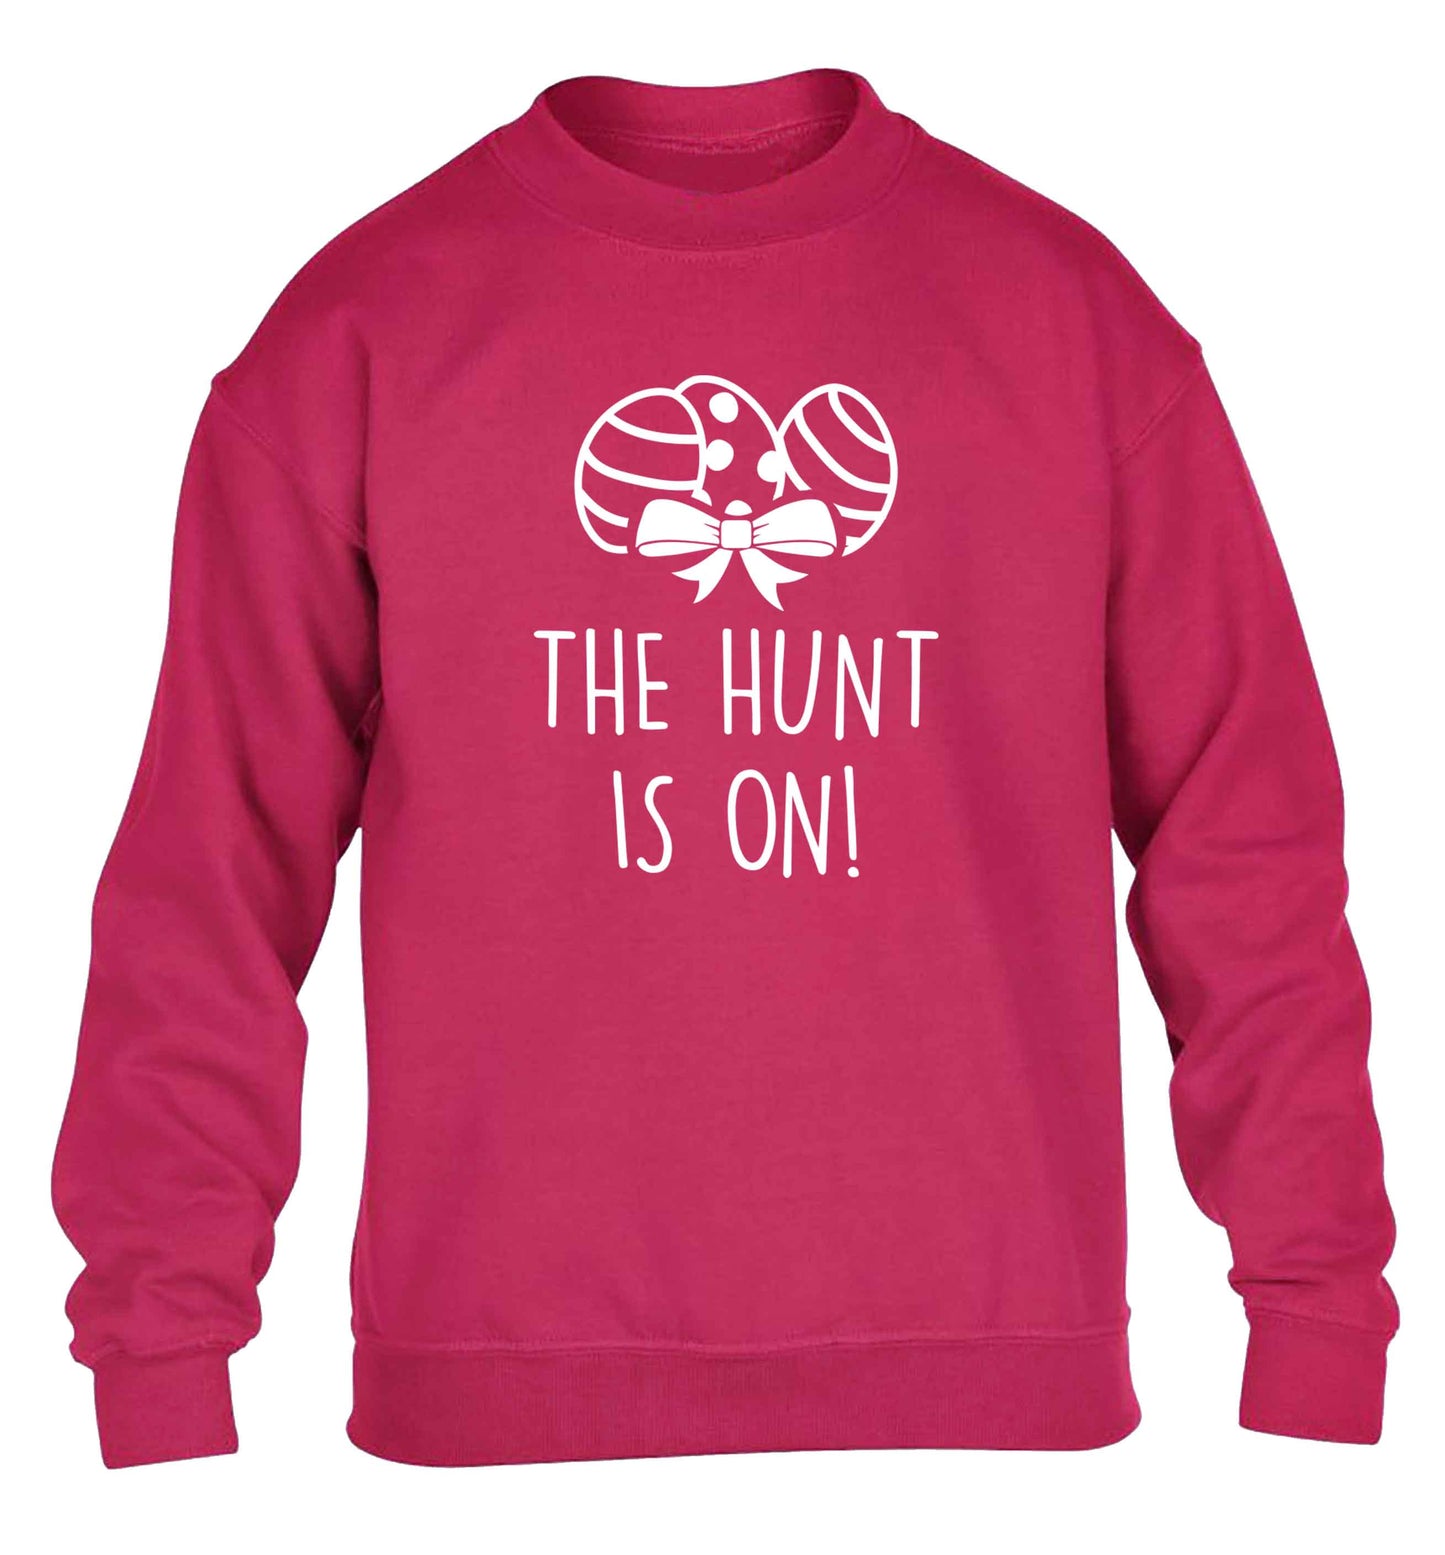 The hunt is on children's pink sweater 12-13 Years